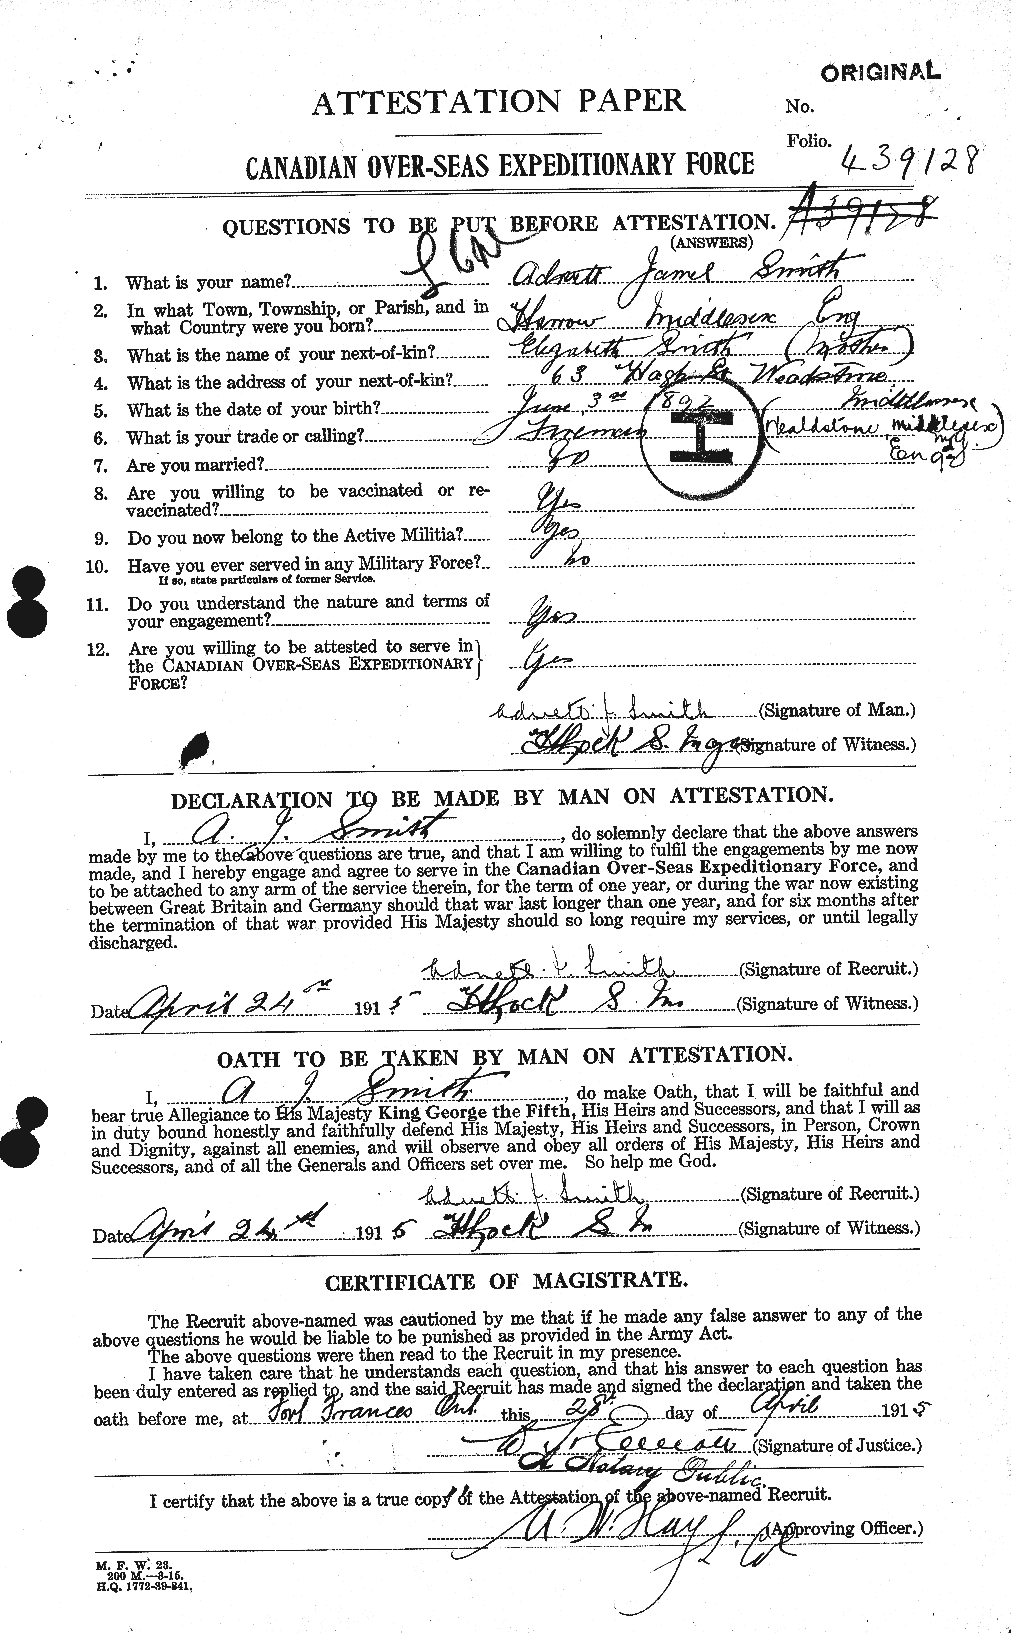 Personnel Records of the First World War - CEF 099240a